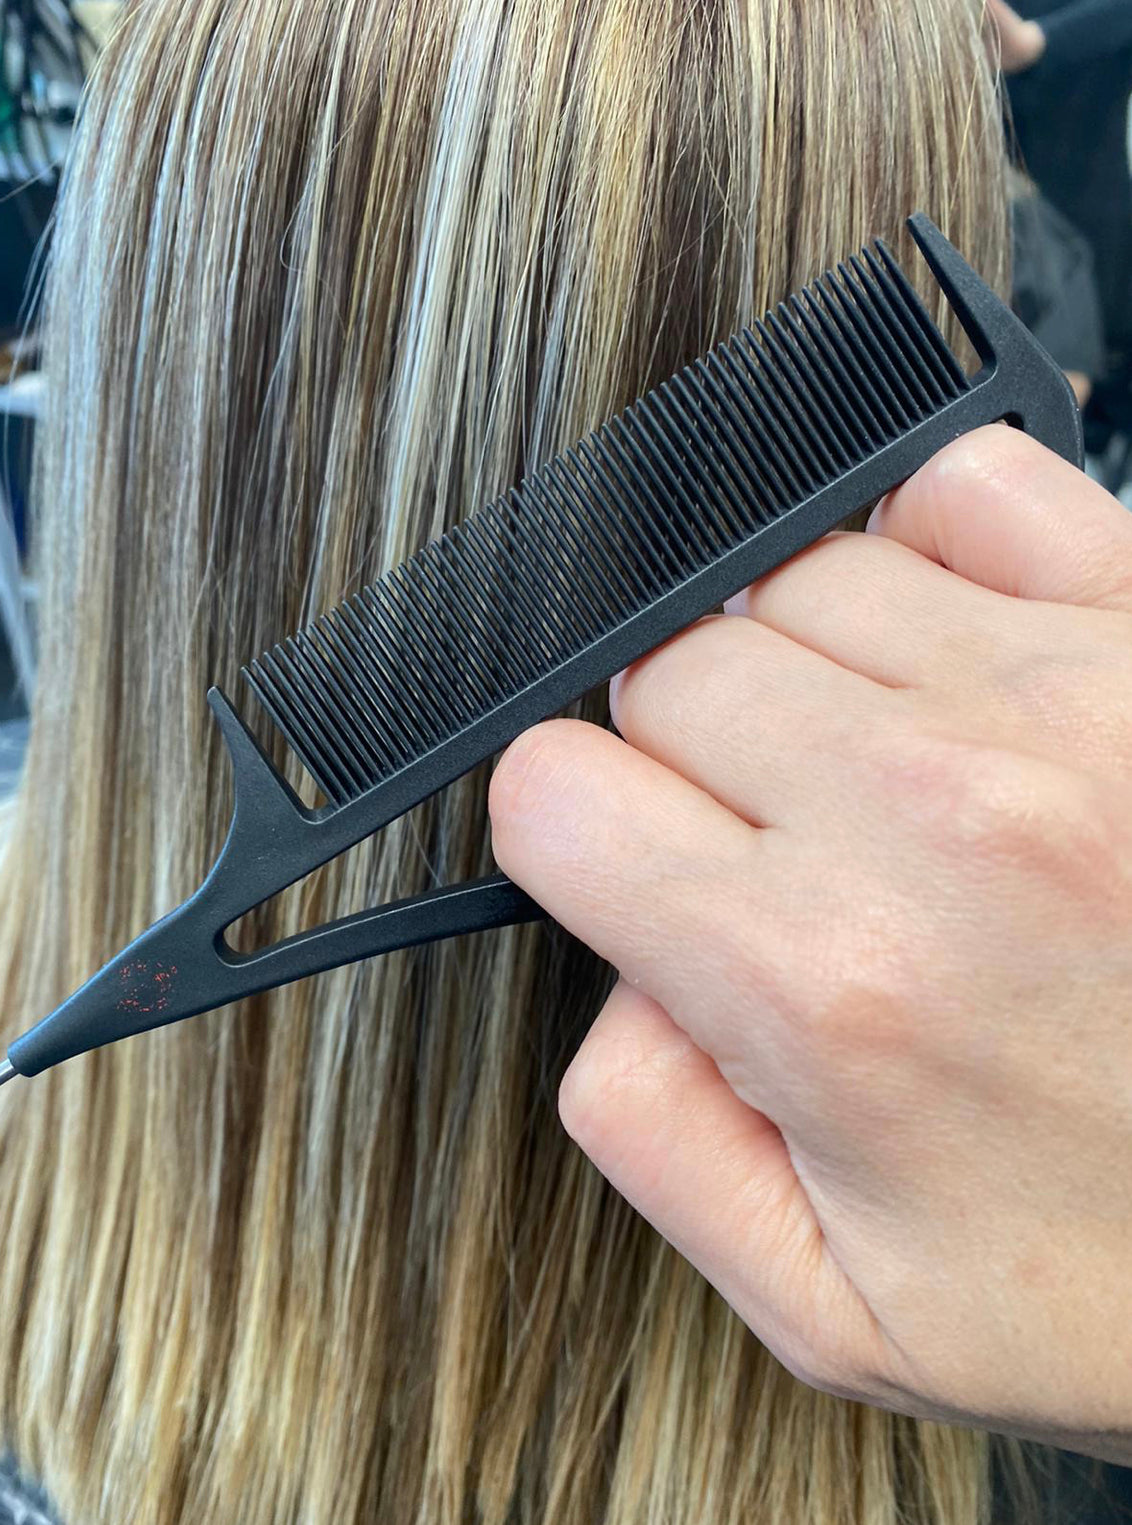 Pink Pewter "Never Let Go" Carbon Fibre Styling and Highlighting Comb (Black 10.25") #2 Phoenix Nationale